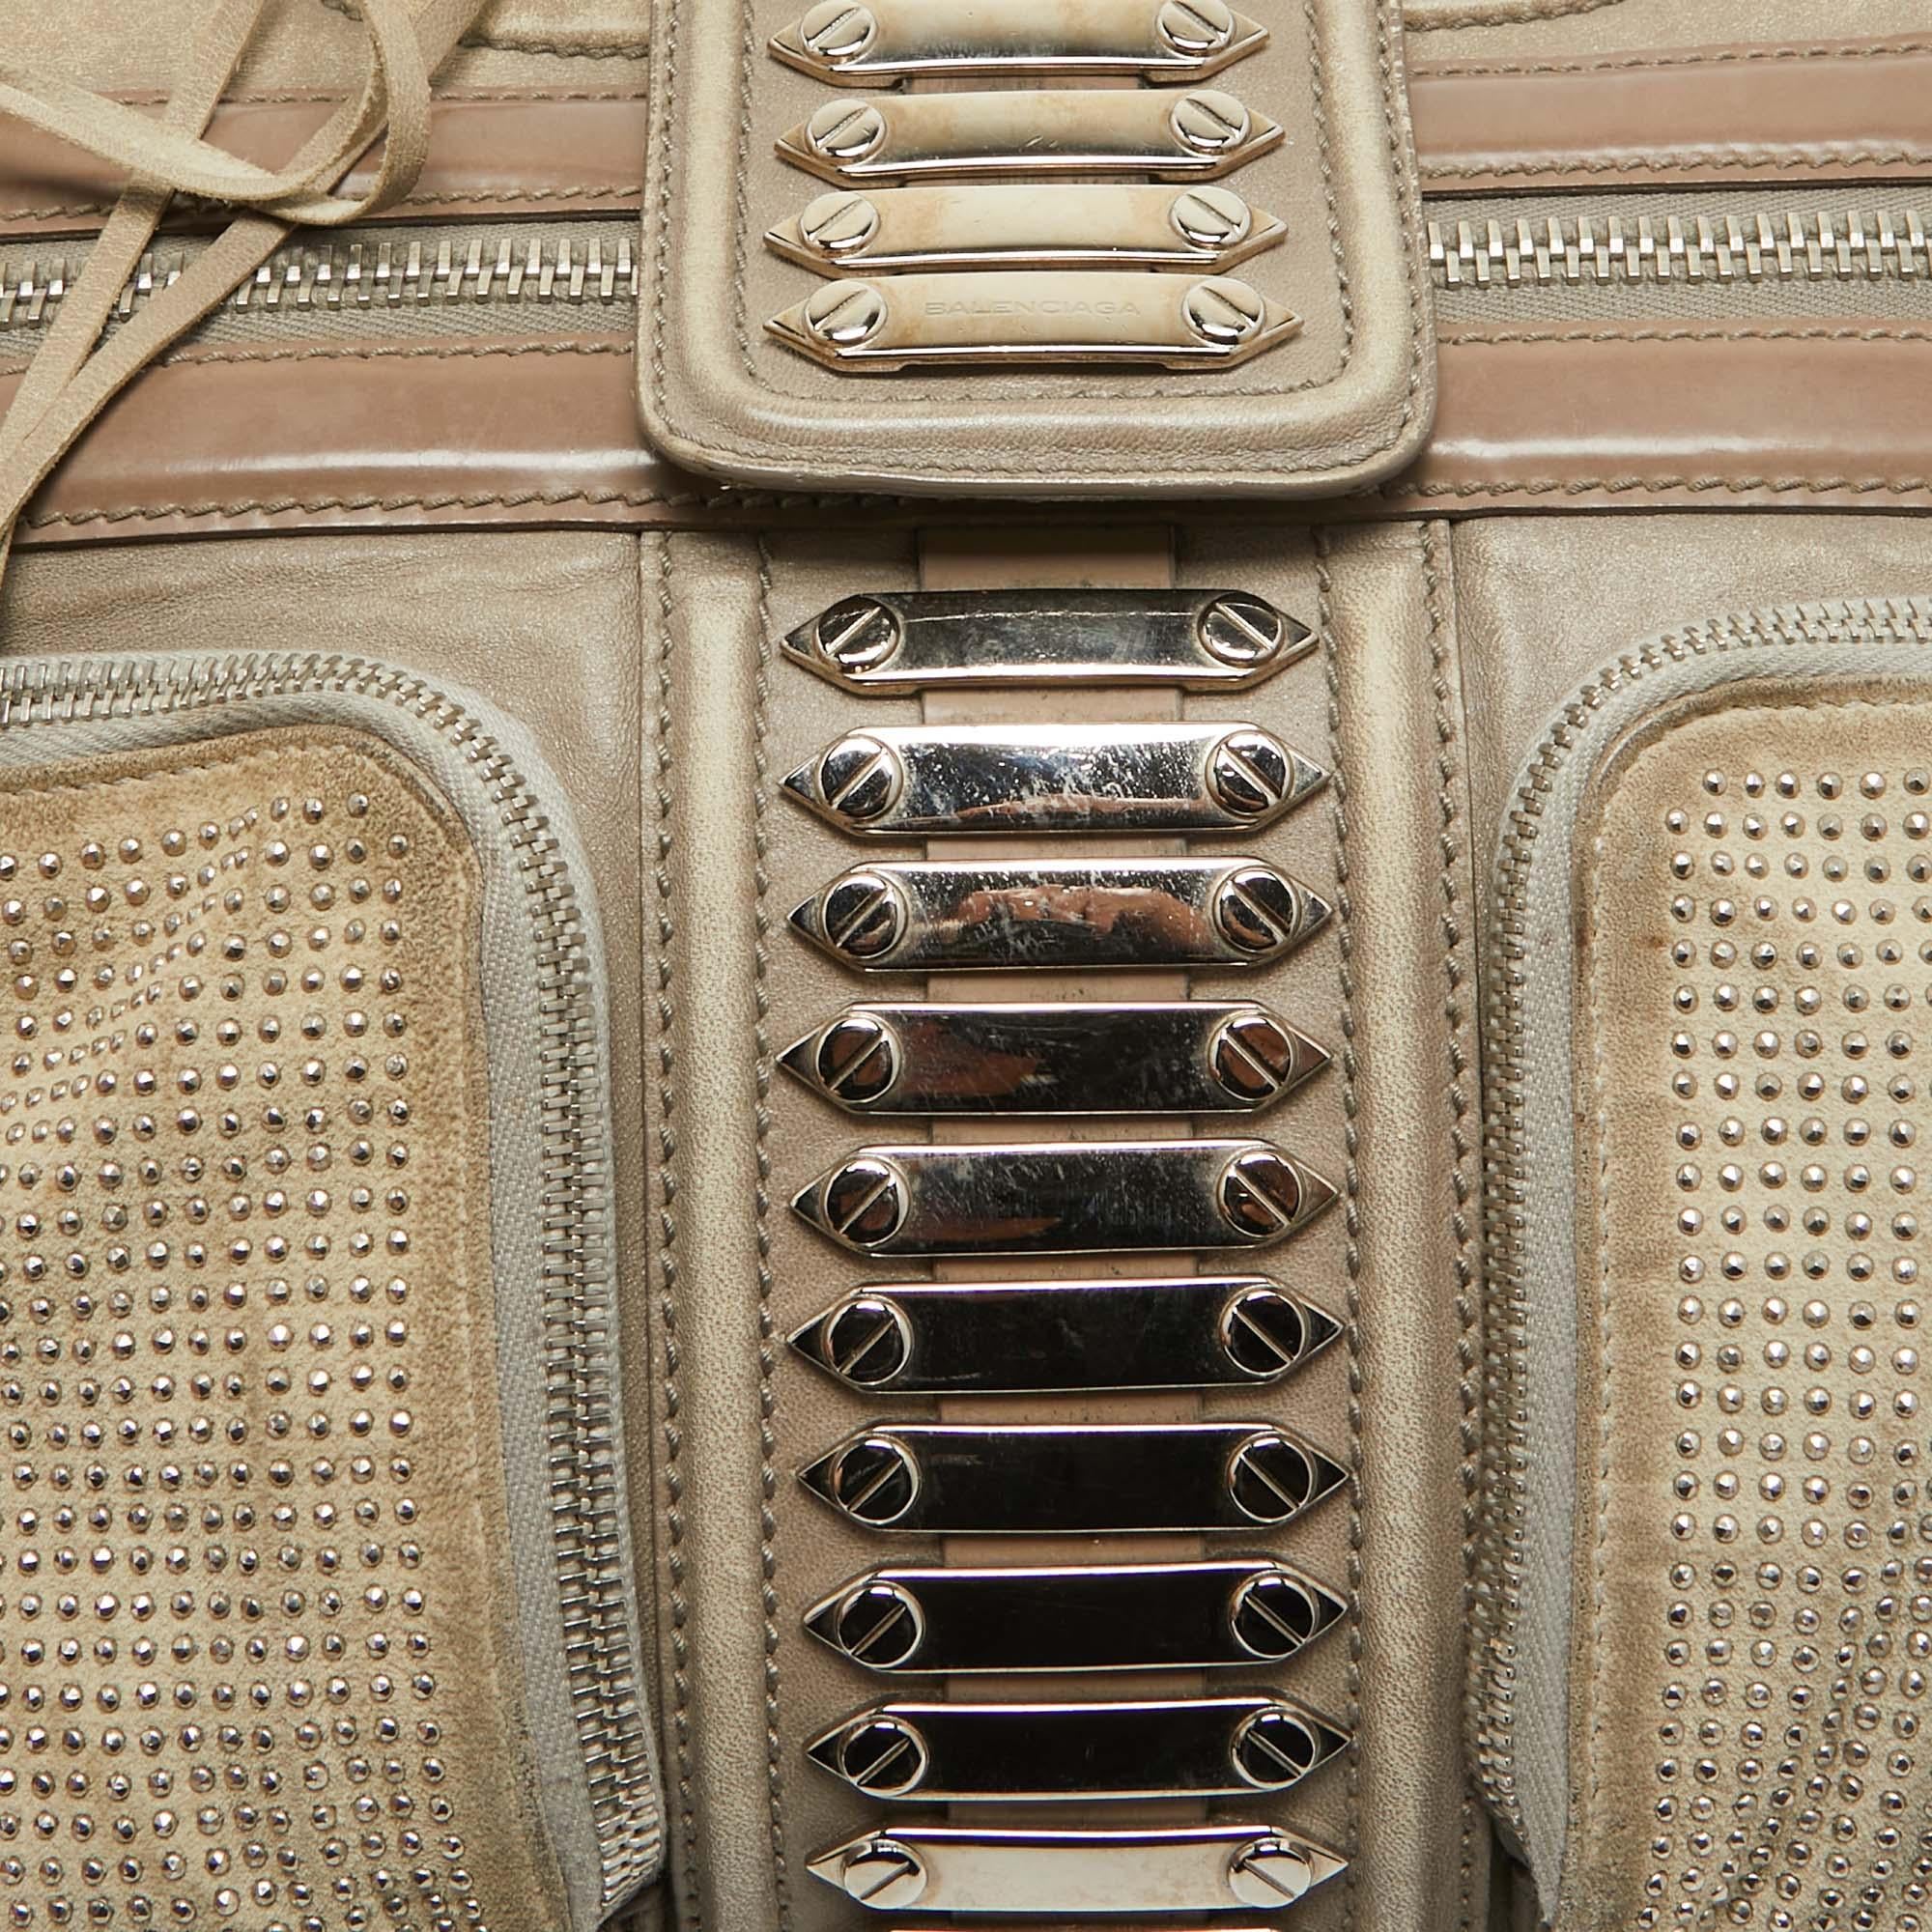 Balenciaga Beige Leather Studded Sac Clous Motorcycle Bag For Sale 10